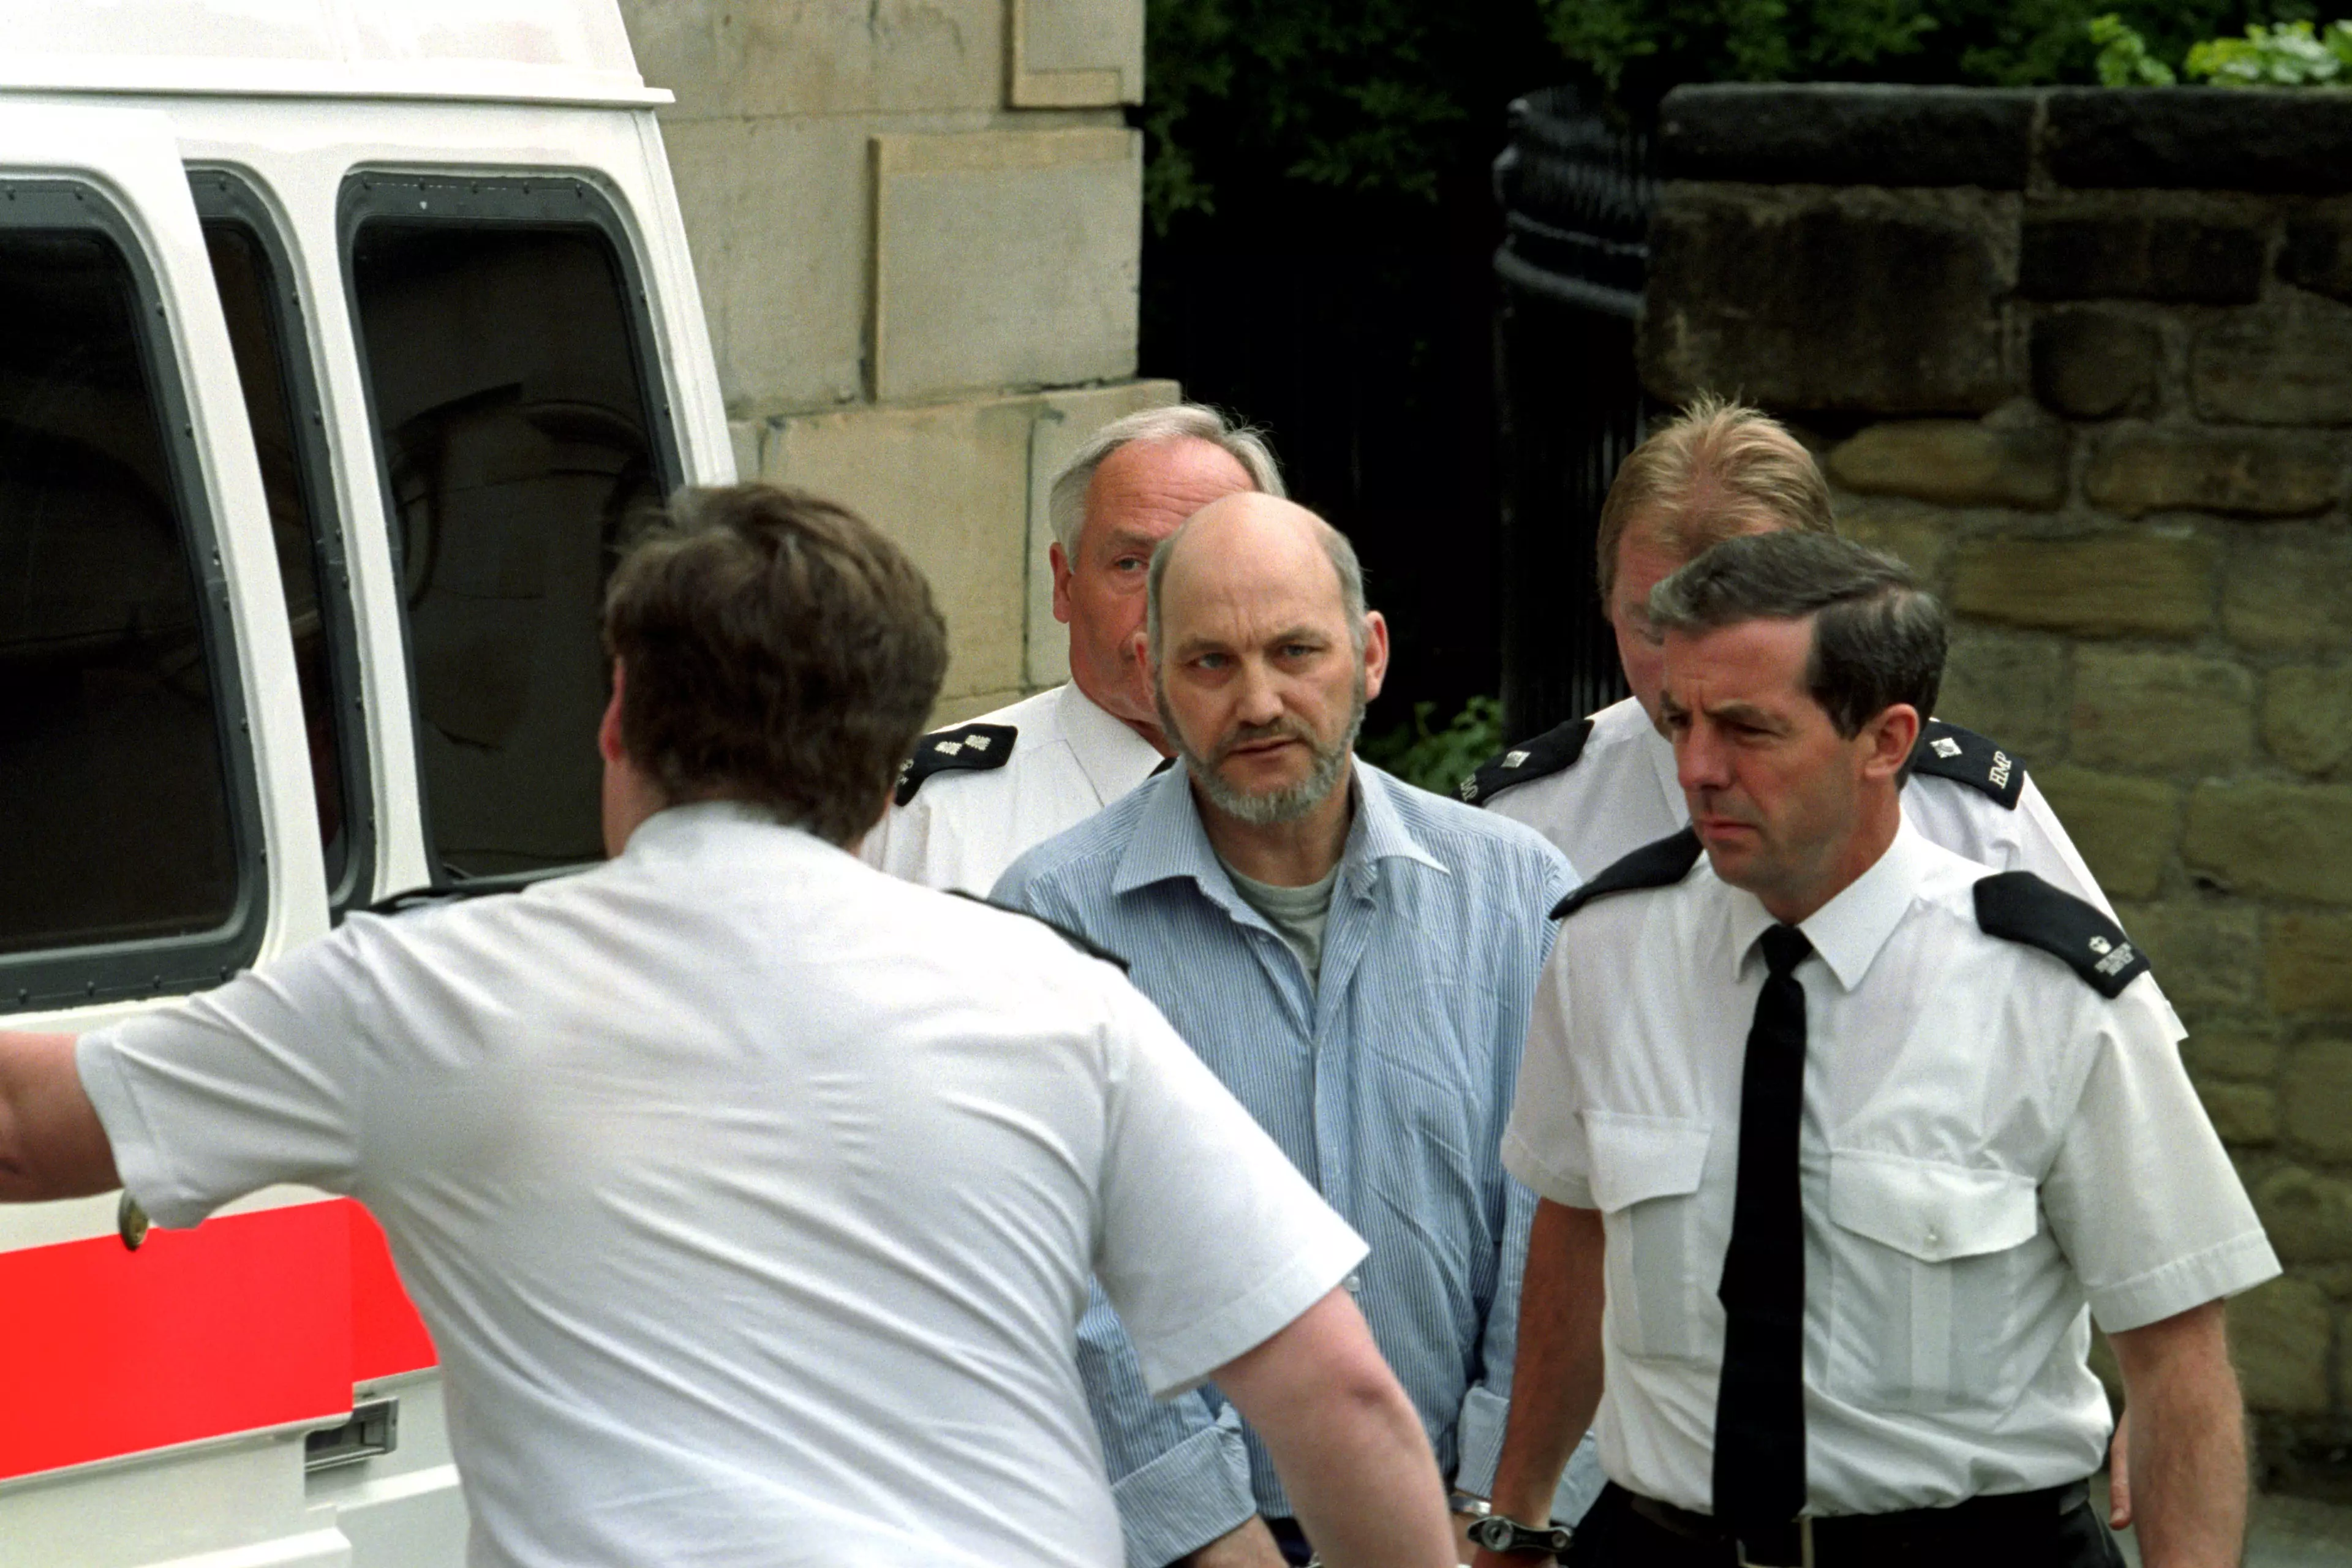 Robert Black was convicted of the murder of four girls (